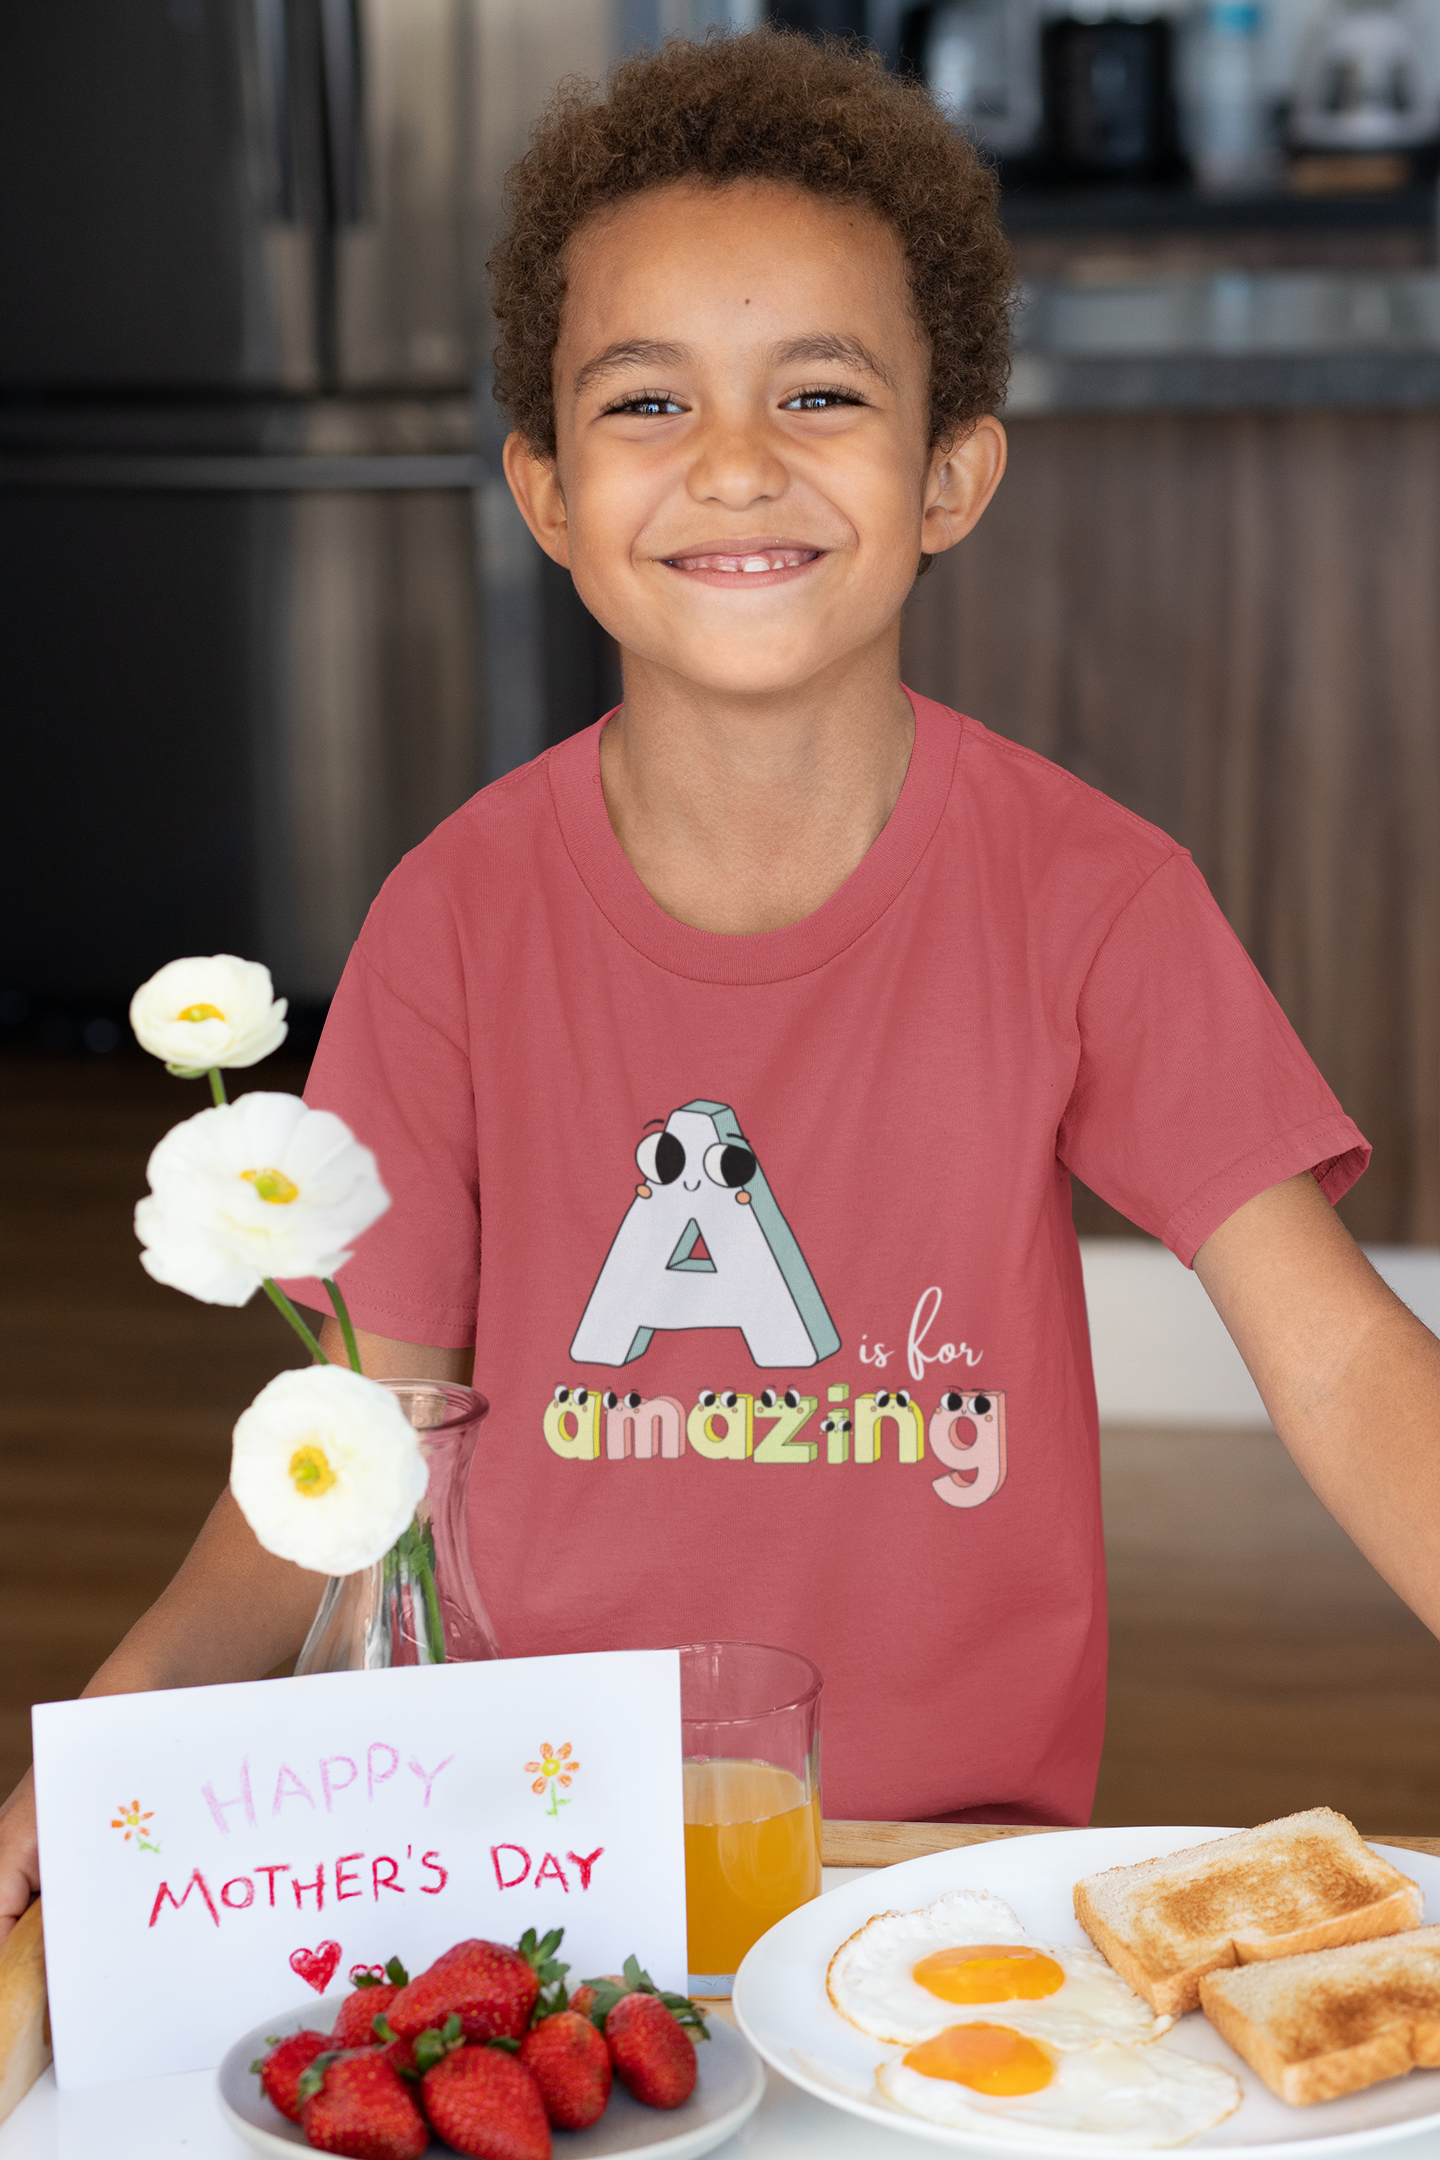 A Is For Amazing - Toddler Short Sleeve Tee